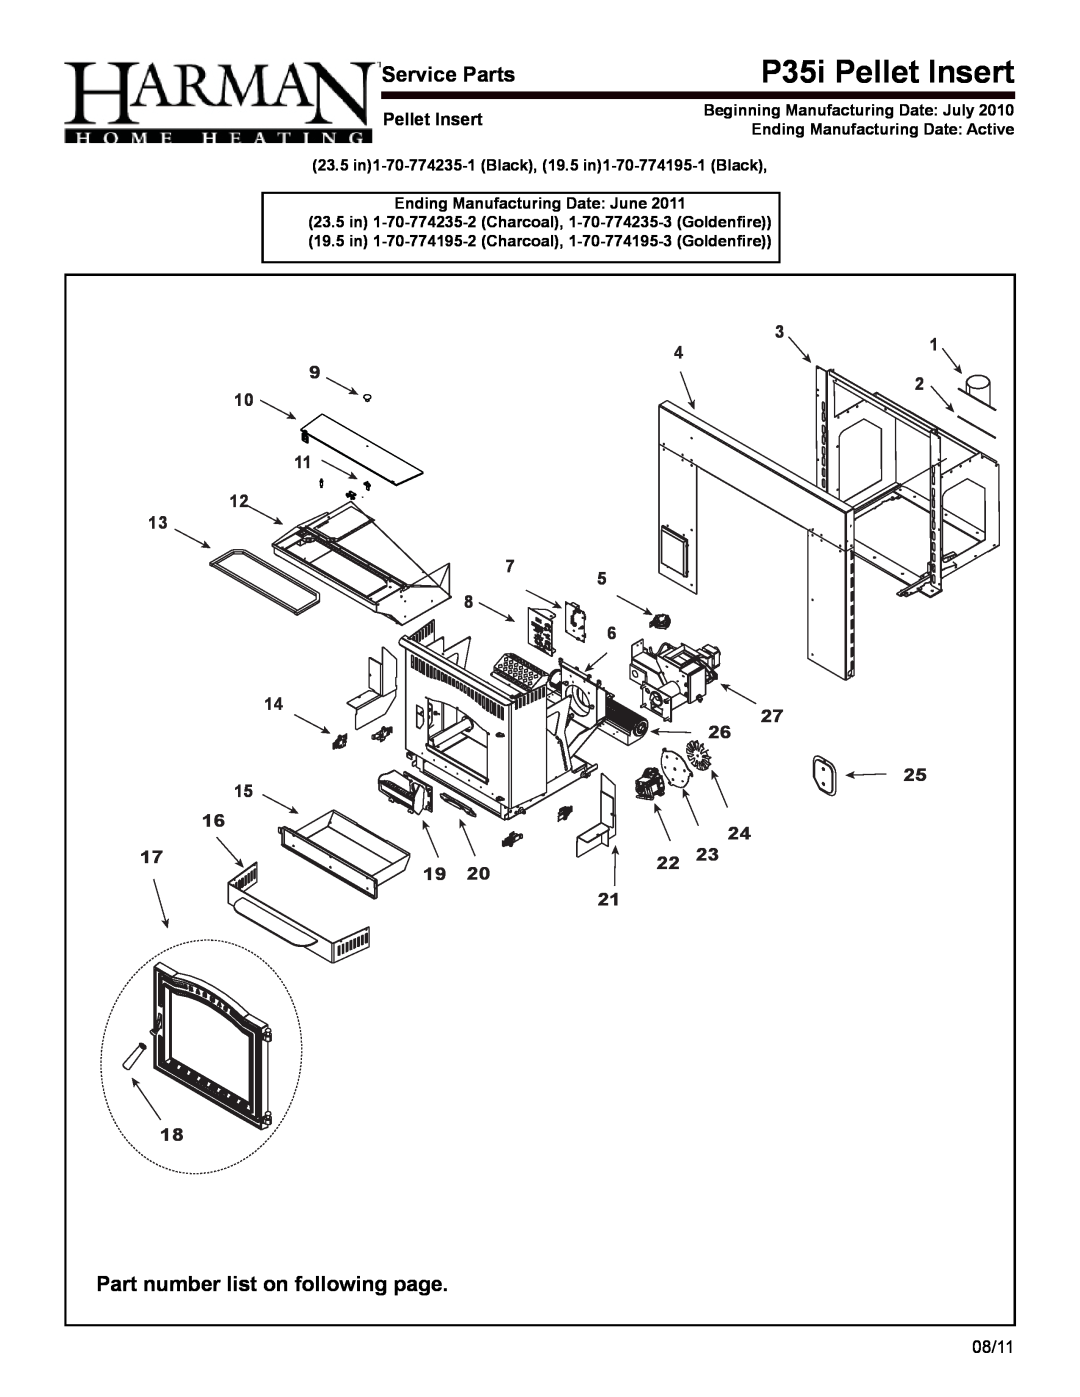 Harman Stove Company P35I P35i Pellet Insert, 9 10 11 12 13, 4 5 6, 3 27, Beginning Manufacturing Date July, 23.5 in 